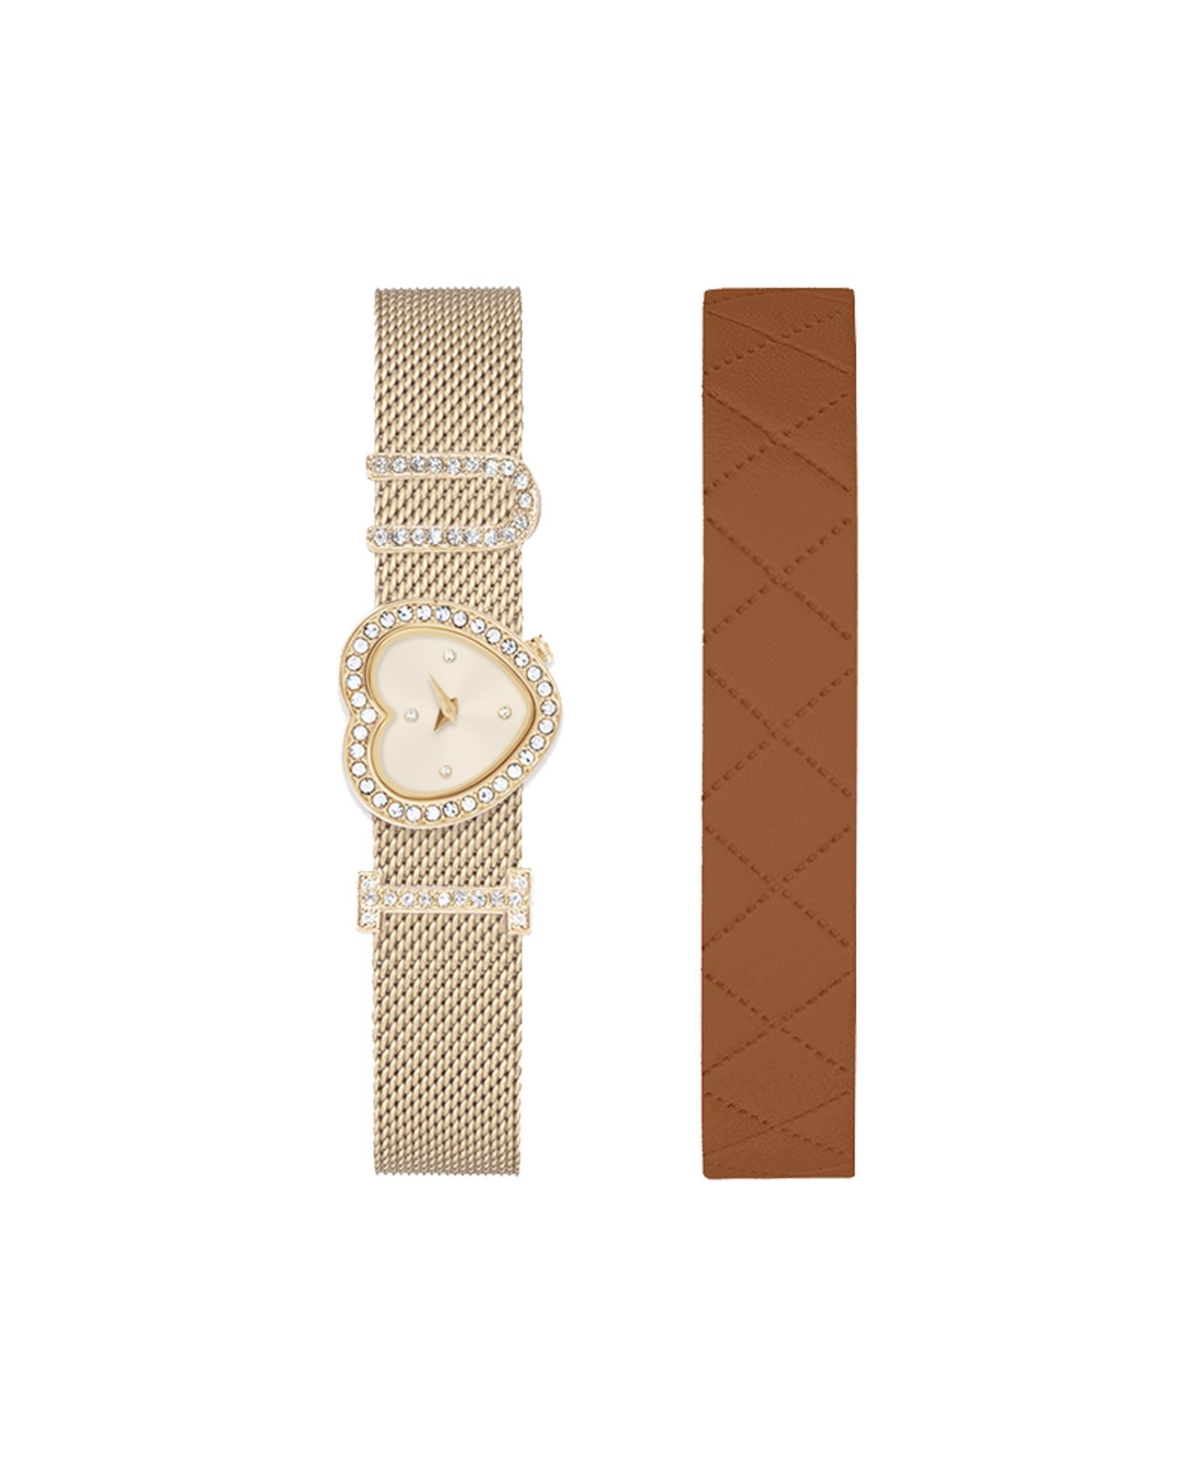 Jessica Carlyle Women's Shiny Gold-Tone Bracelet Analog Watch 21mm with Interchangeable Leather Strap